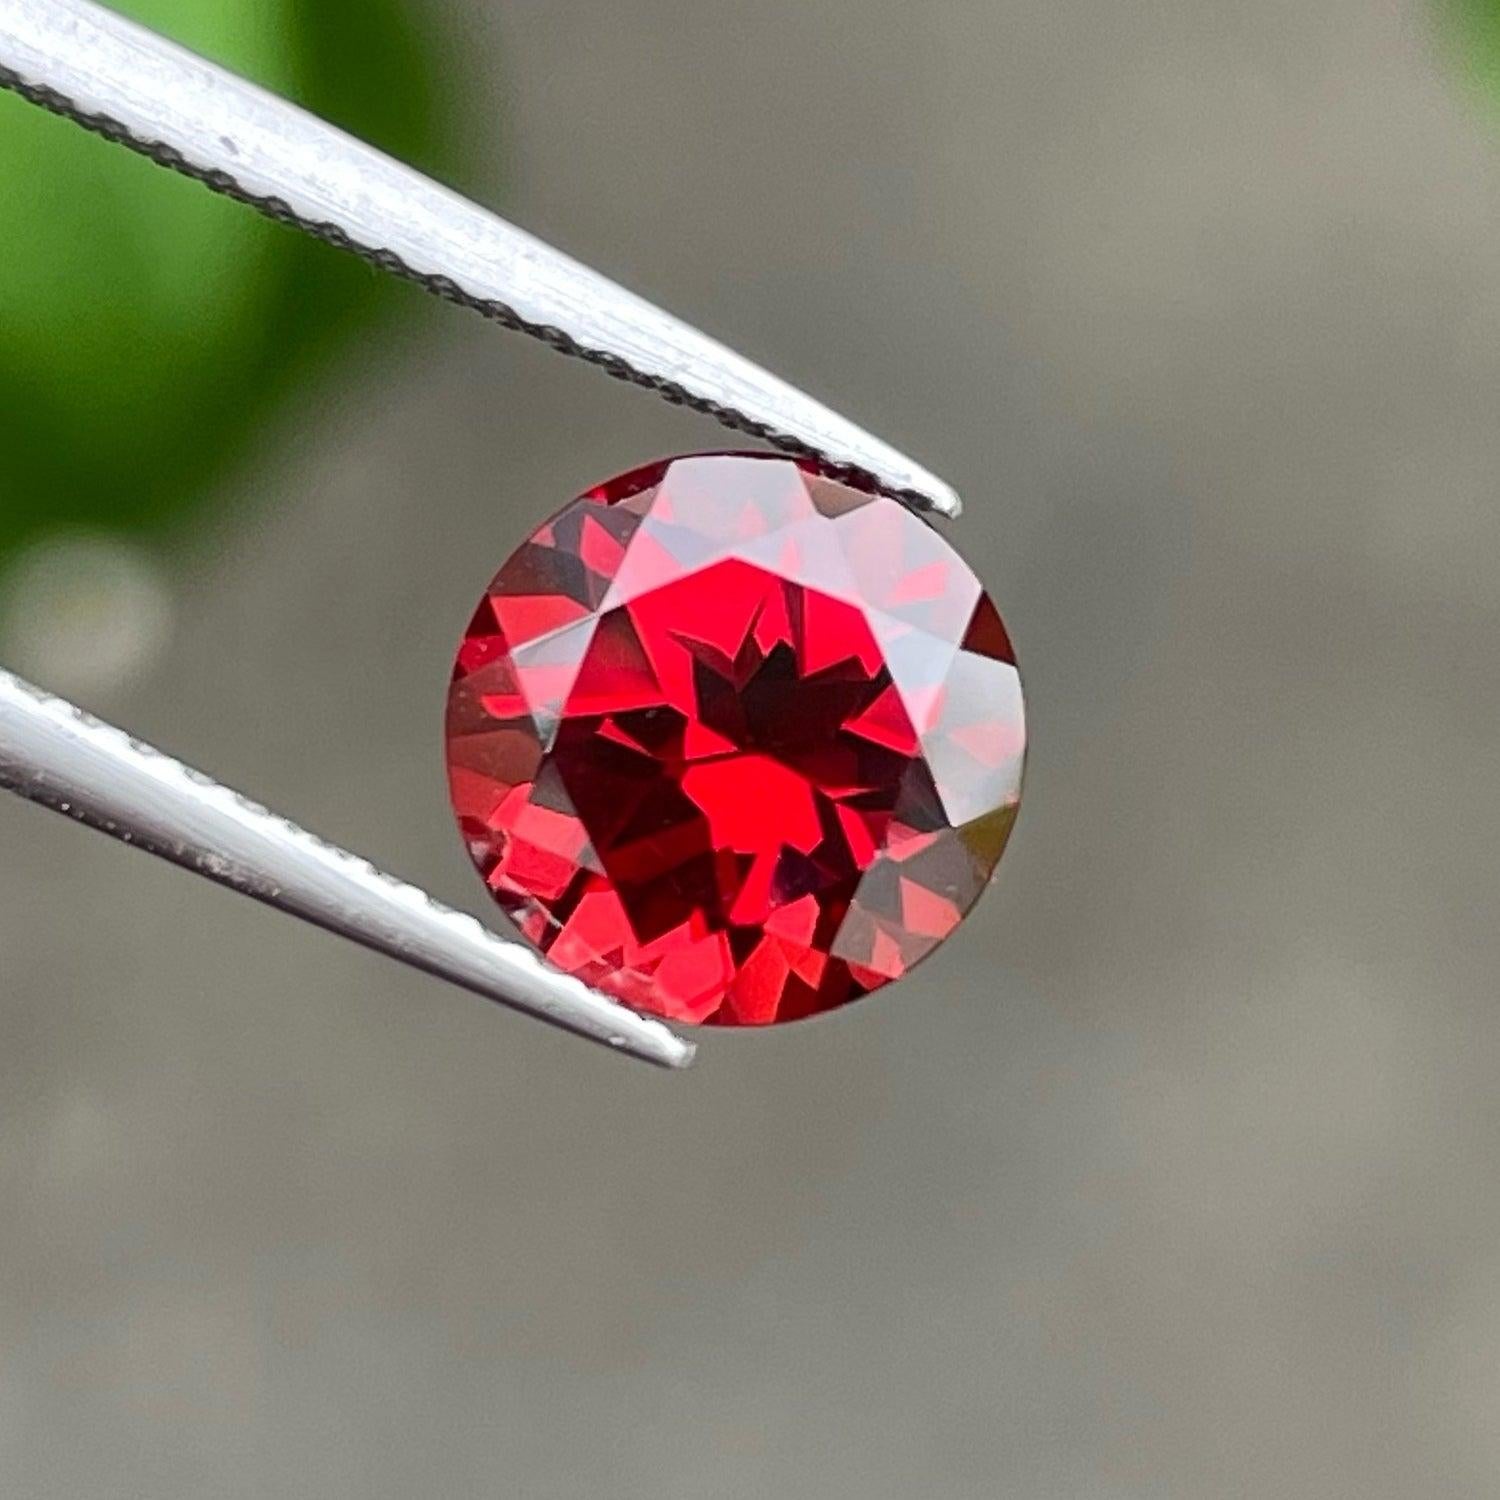 Shiny Natural Red Garnet For Ring, Available For Sale at Wholesale Price Natural High Quality 2.60 Carats Unheated  Garnet Gemstone From Malawi.

 

Product Information:
GEMSTONE NAME: Shiny Natural Red Garnet For Ring
WEIGHT: 2.60